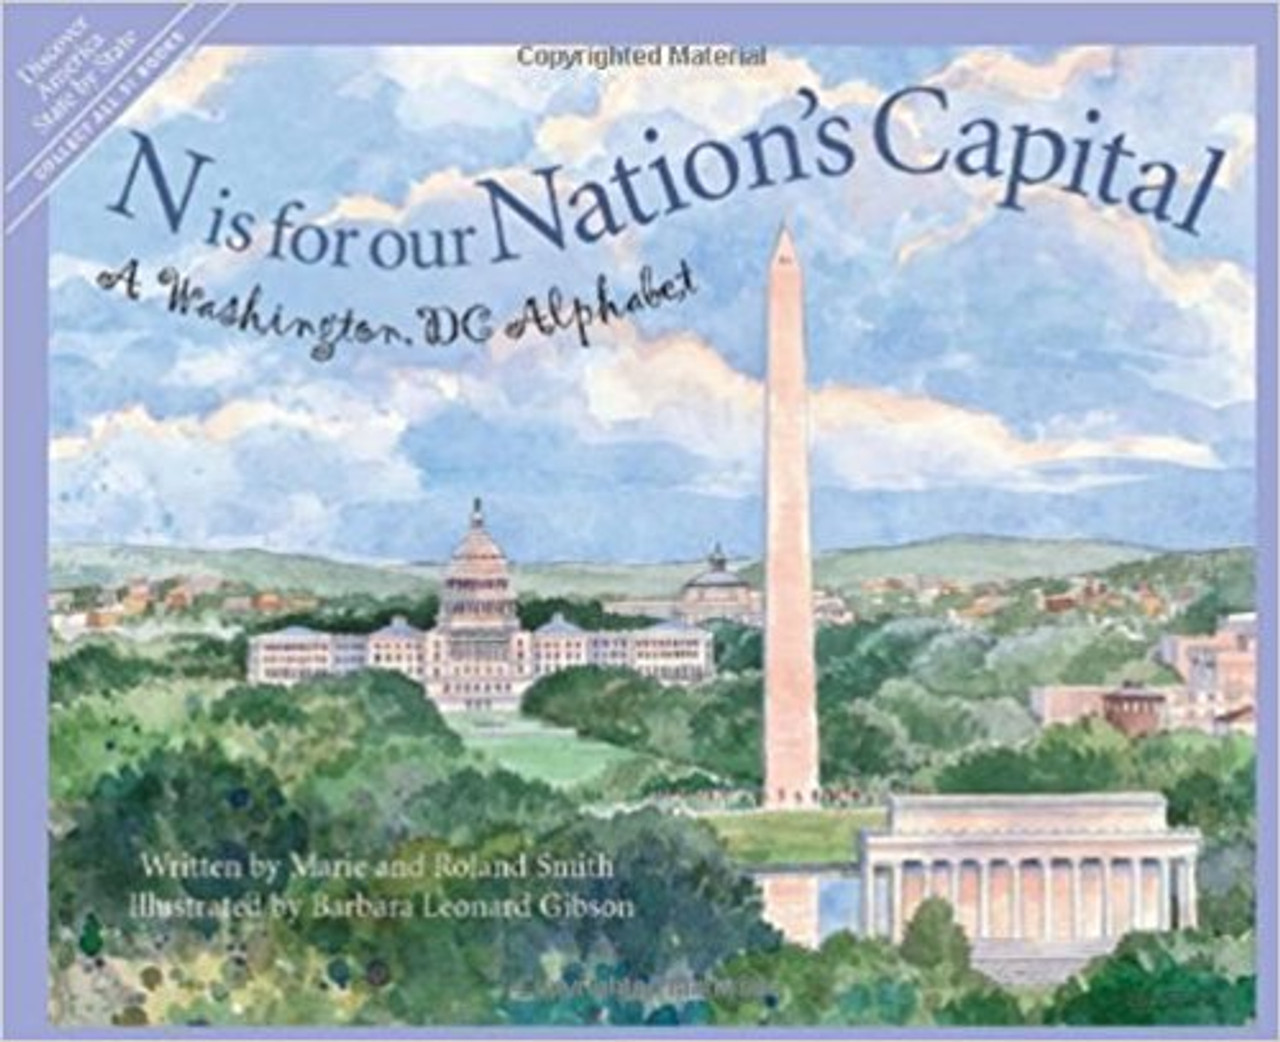 N Is for Our Nation's Capital: A Washington DC Alphabet by Marie Smith